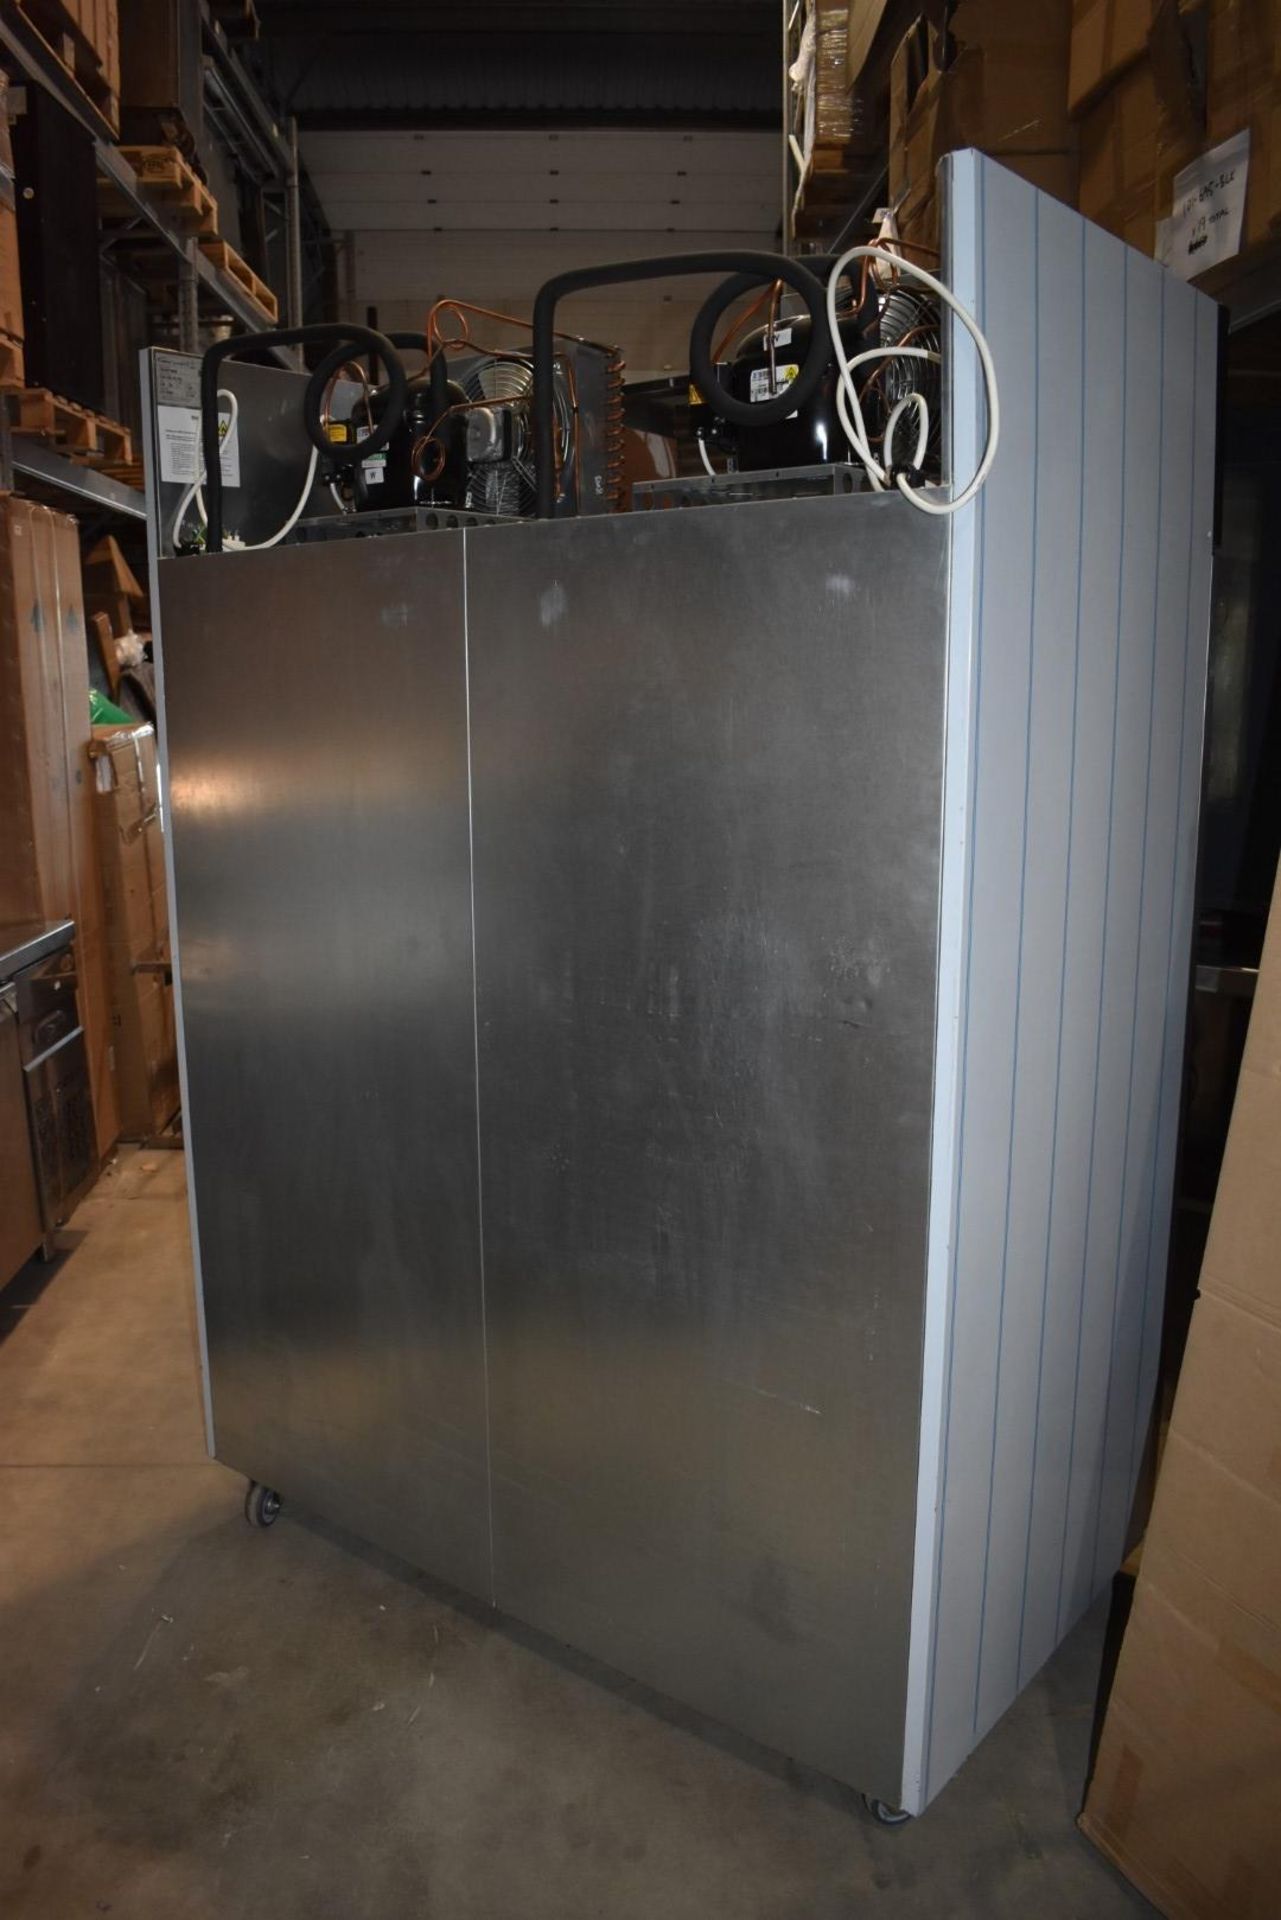 1 x Williams Garnet 2000 Two Door Upright Fish / Meat Fridge With Stainless Steel Finish - Model - Image 12 of 15